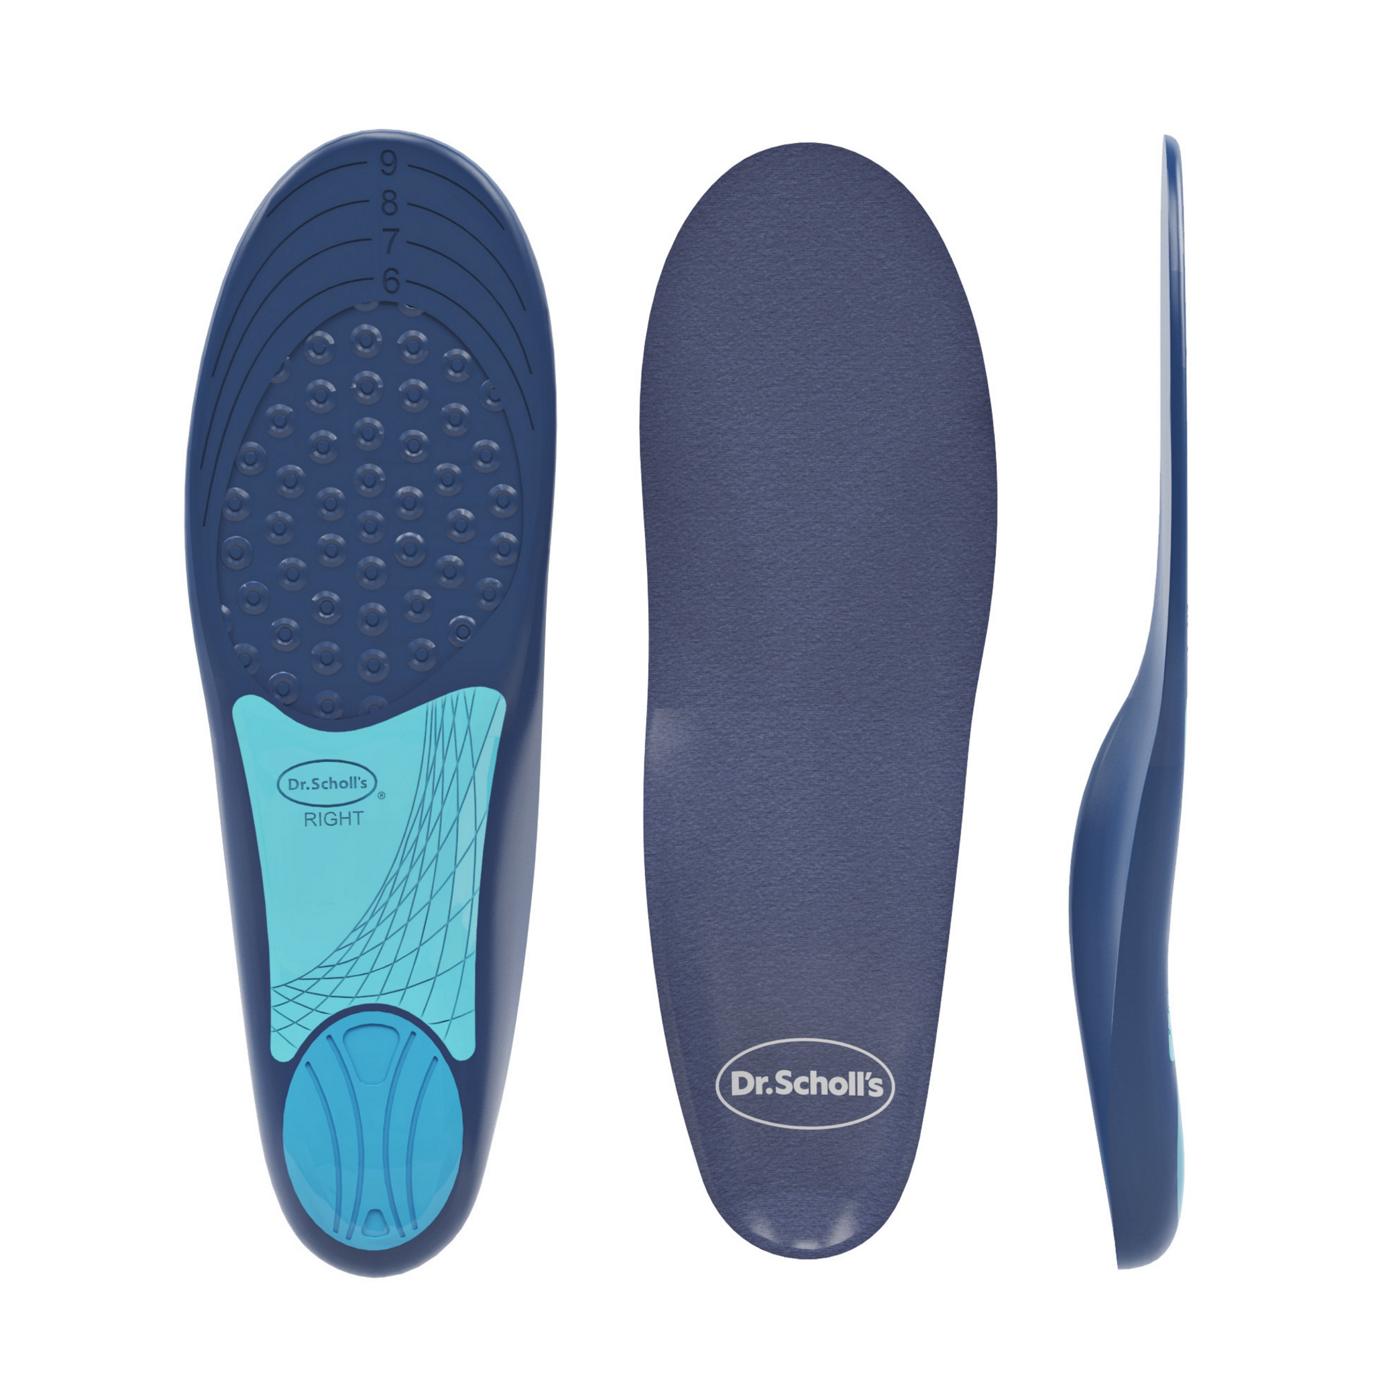 Dr. Scholl's Plantar Fasciitis Pain Relief Orthotics Inserts - Women's 6-10; image 10 of 12